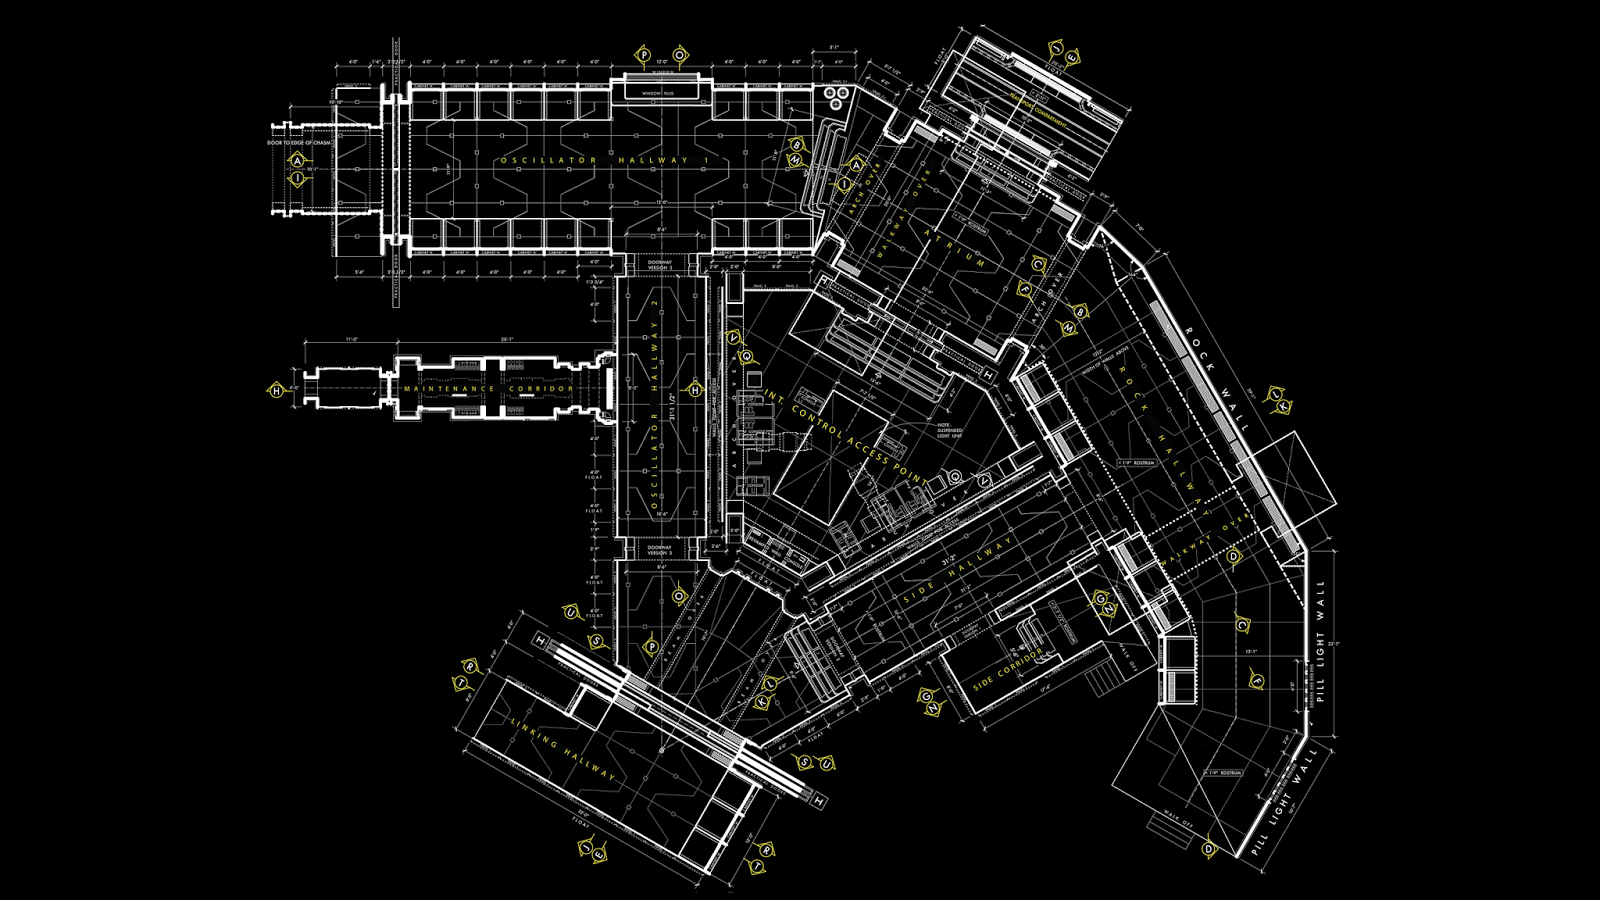 Wired Reveals Starkiller Base Blueprints From The Force Awakens